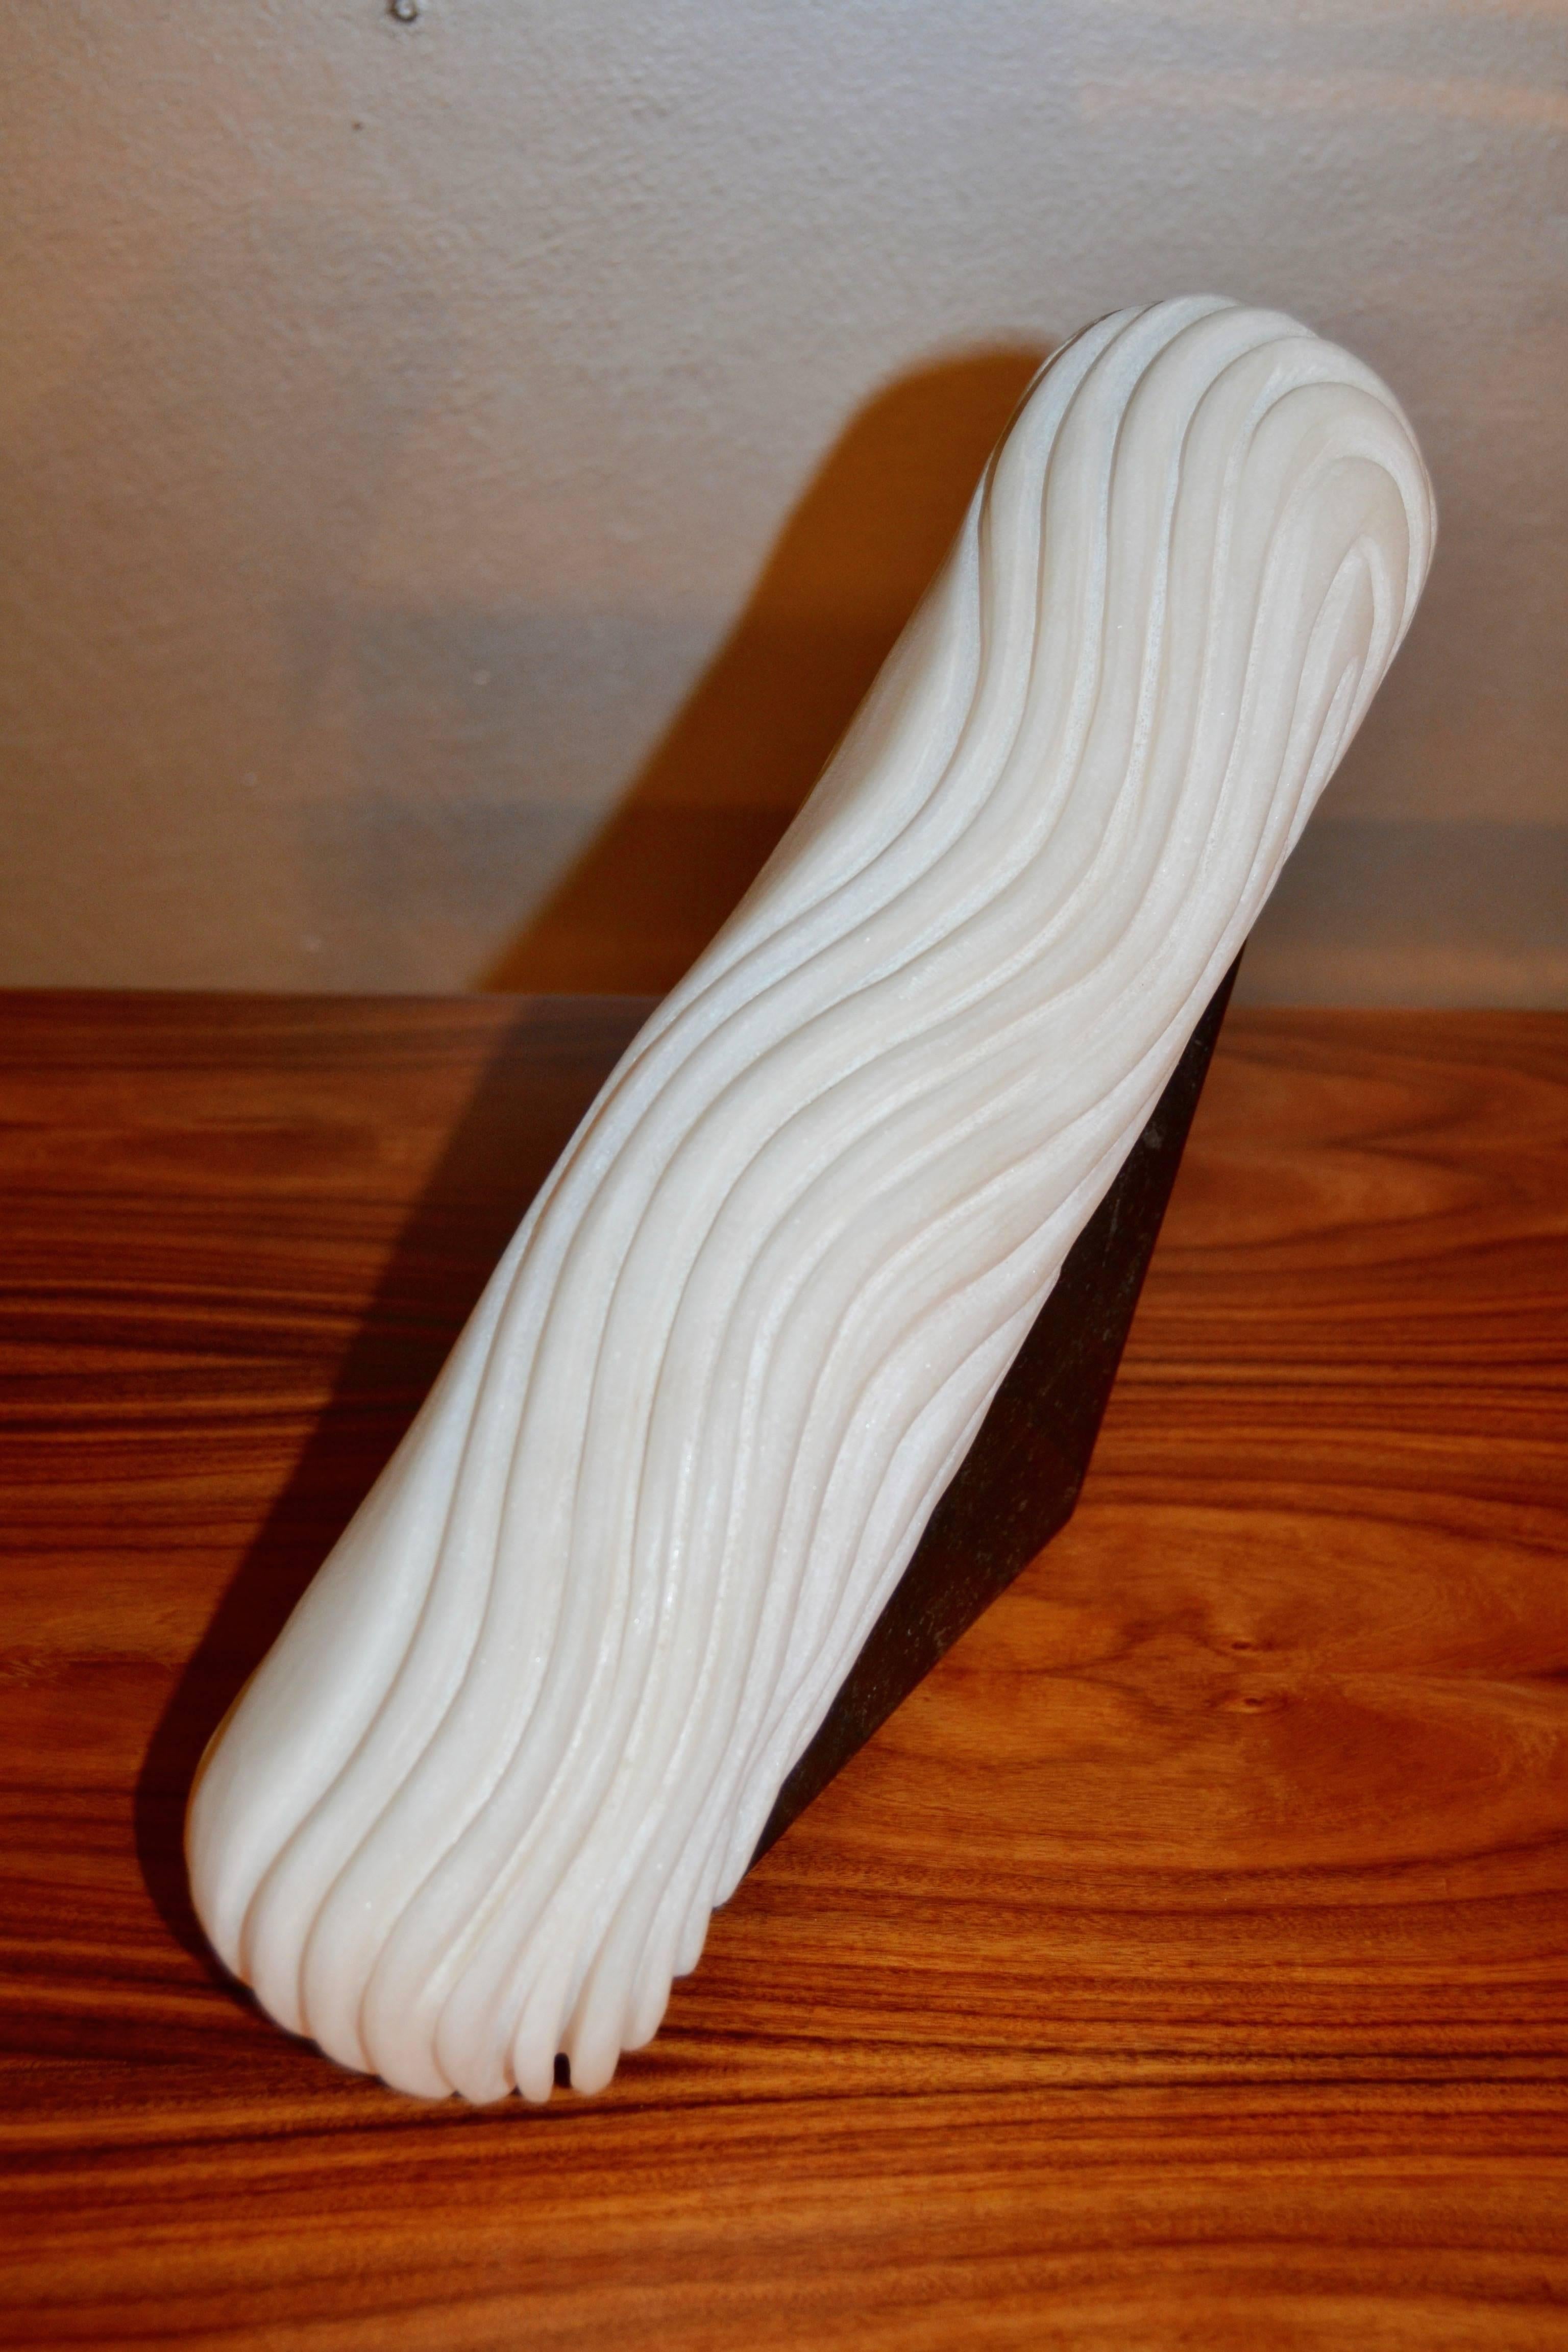 Extremoz creme marble sculpture with black Kilkenny limestone base by the French artist Jean Frederique Bourdier.